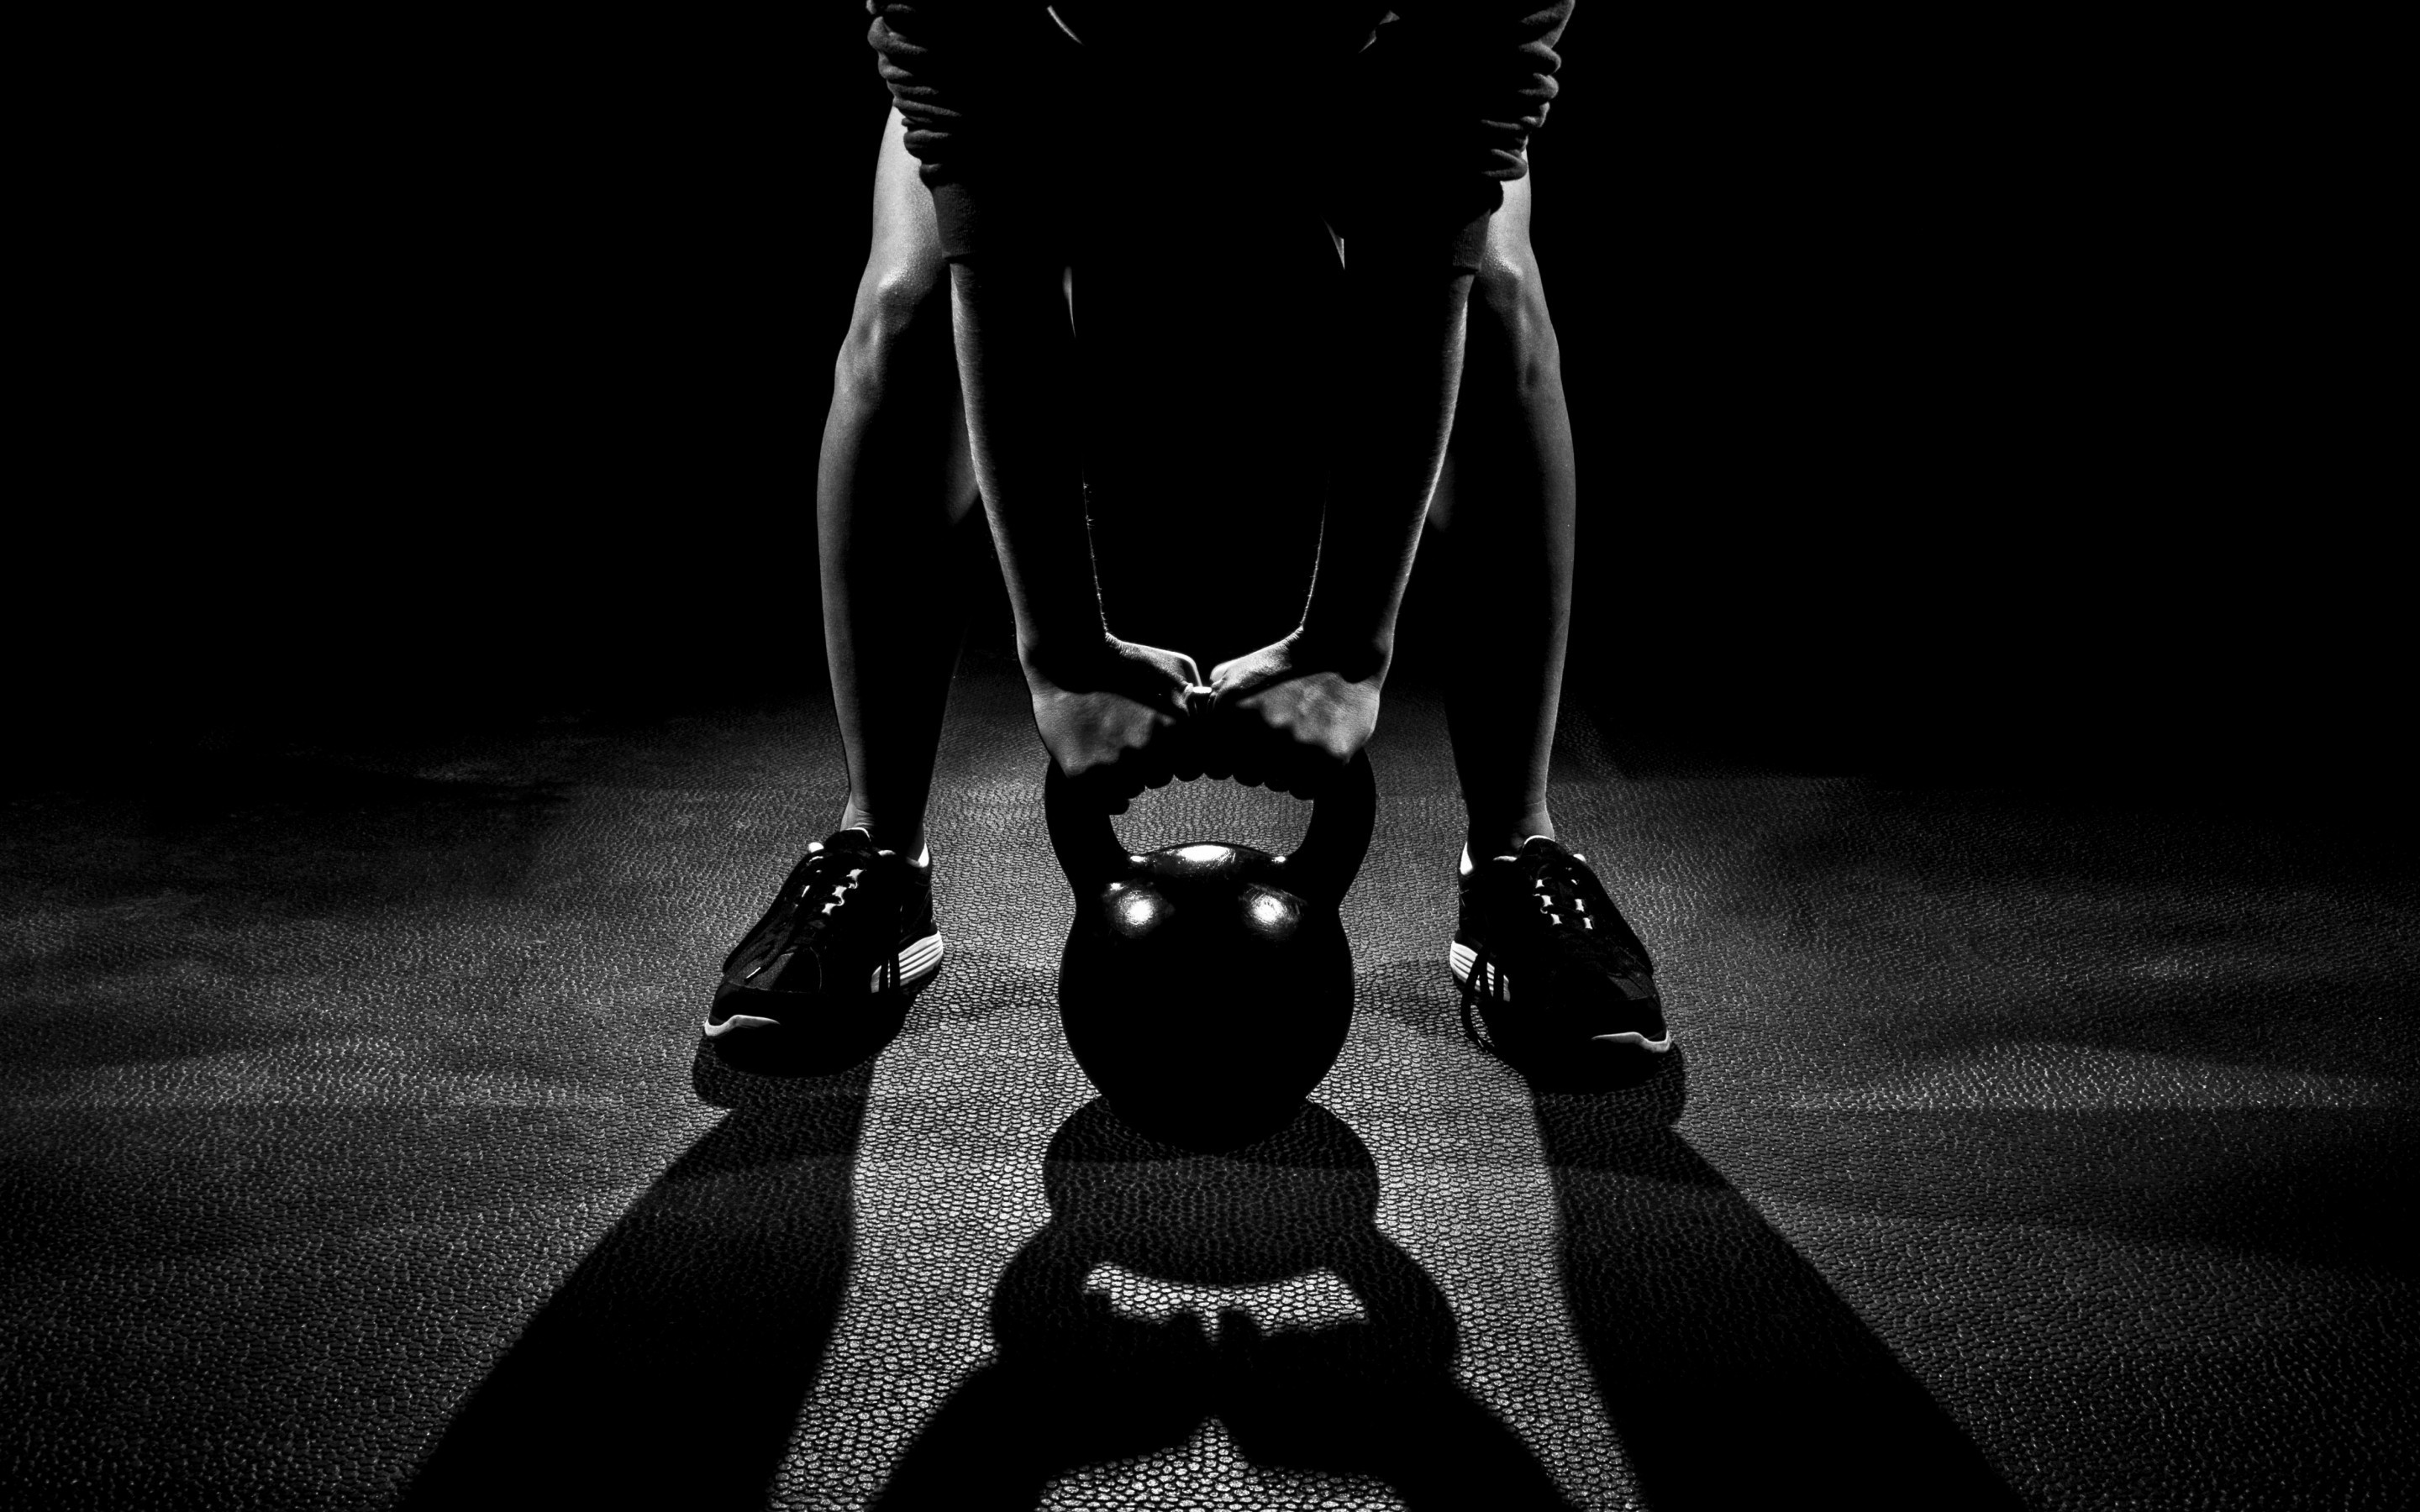  Workout Black Background for Push Pull Legs